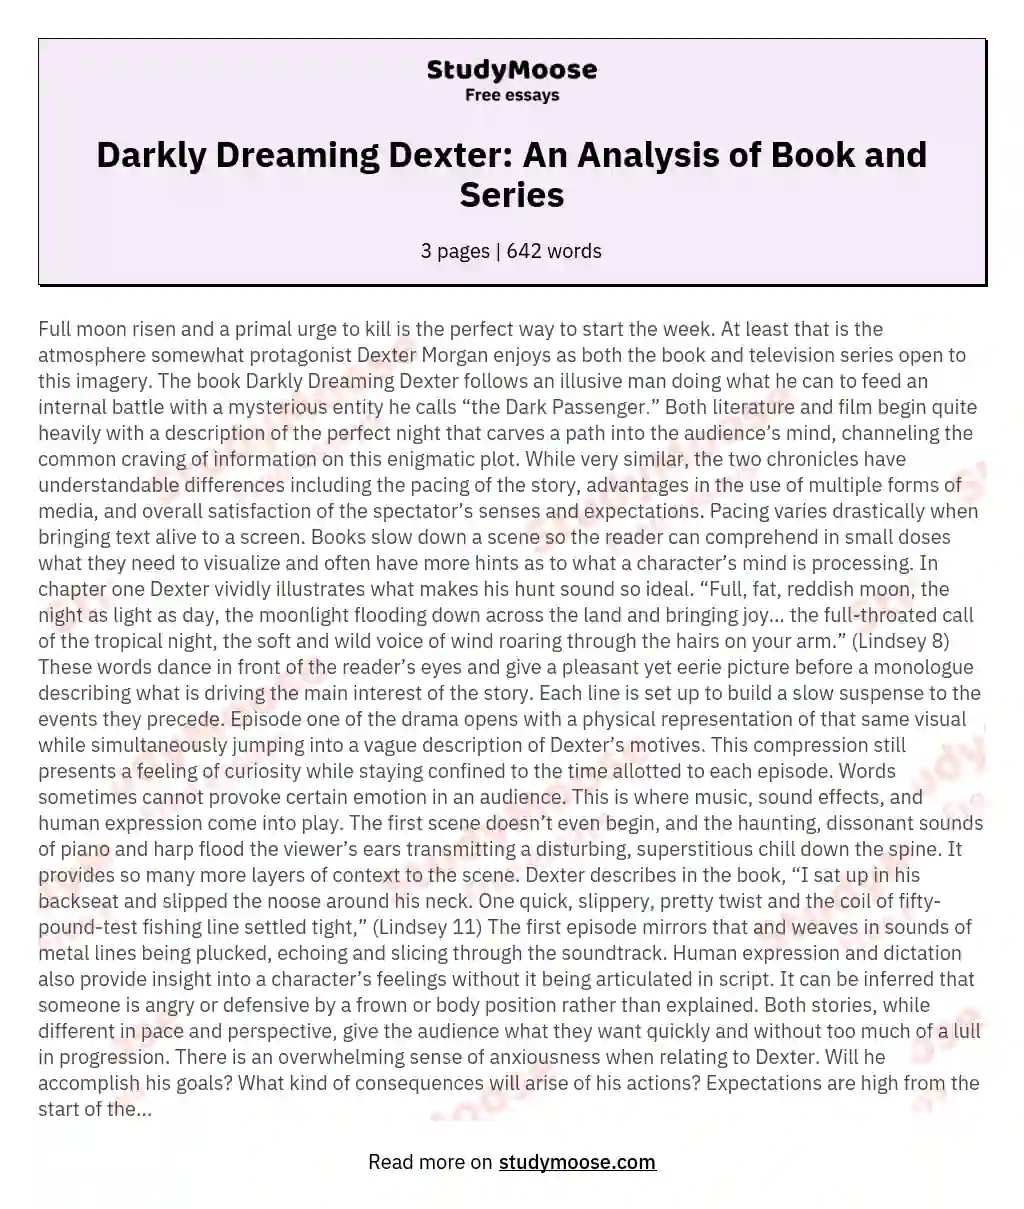 Darkly Dreaming Dexter: An Analysis of Book and Series